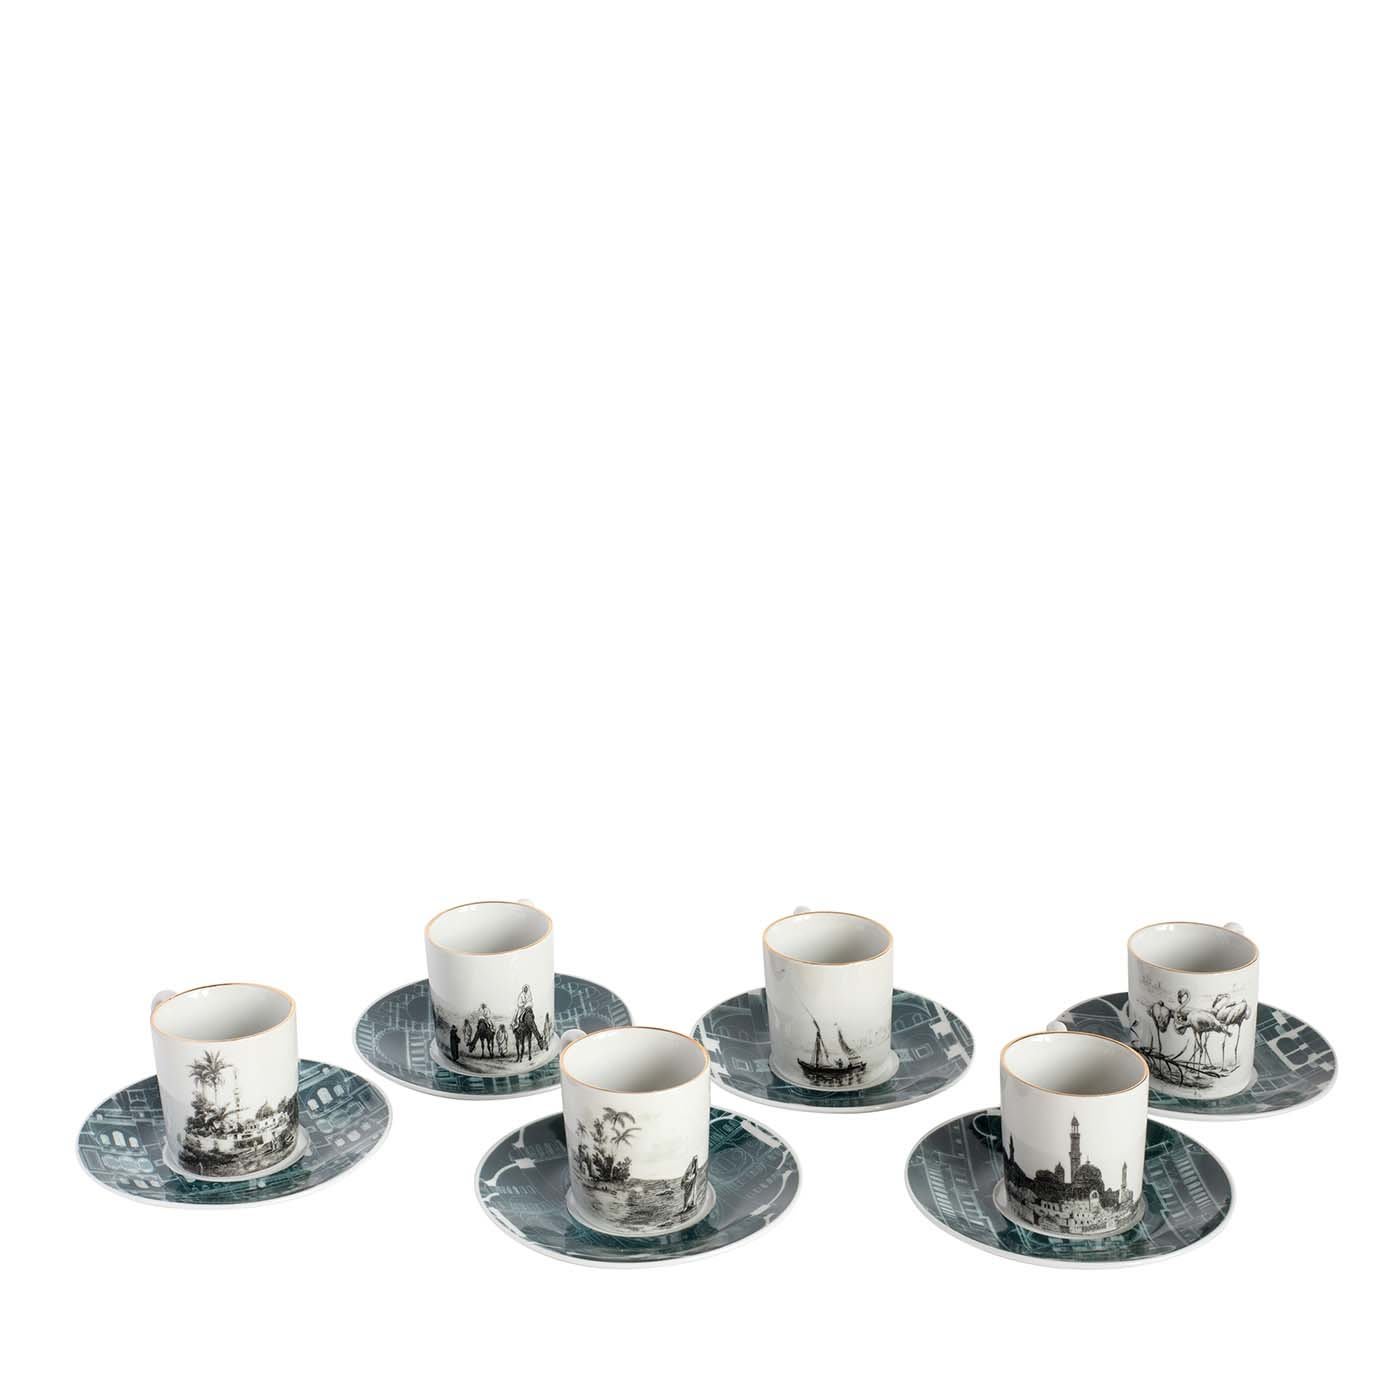 Lebanon Set of 6 Espresso Cups with Saucers - Grand Tour by Vito Nesta